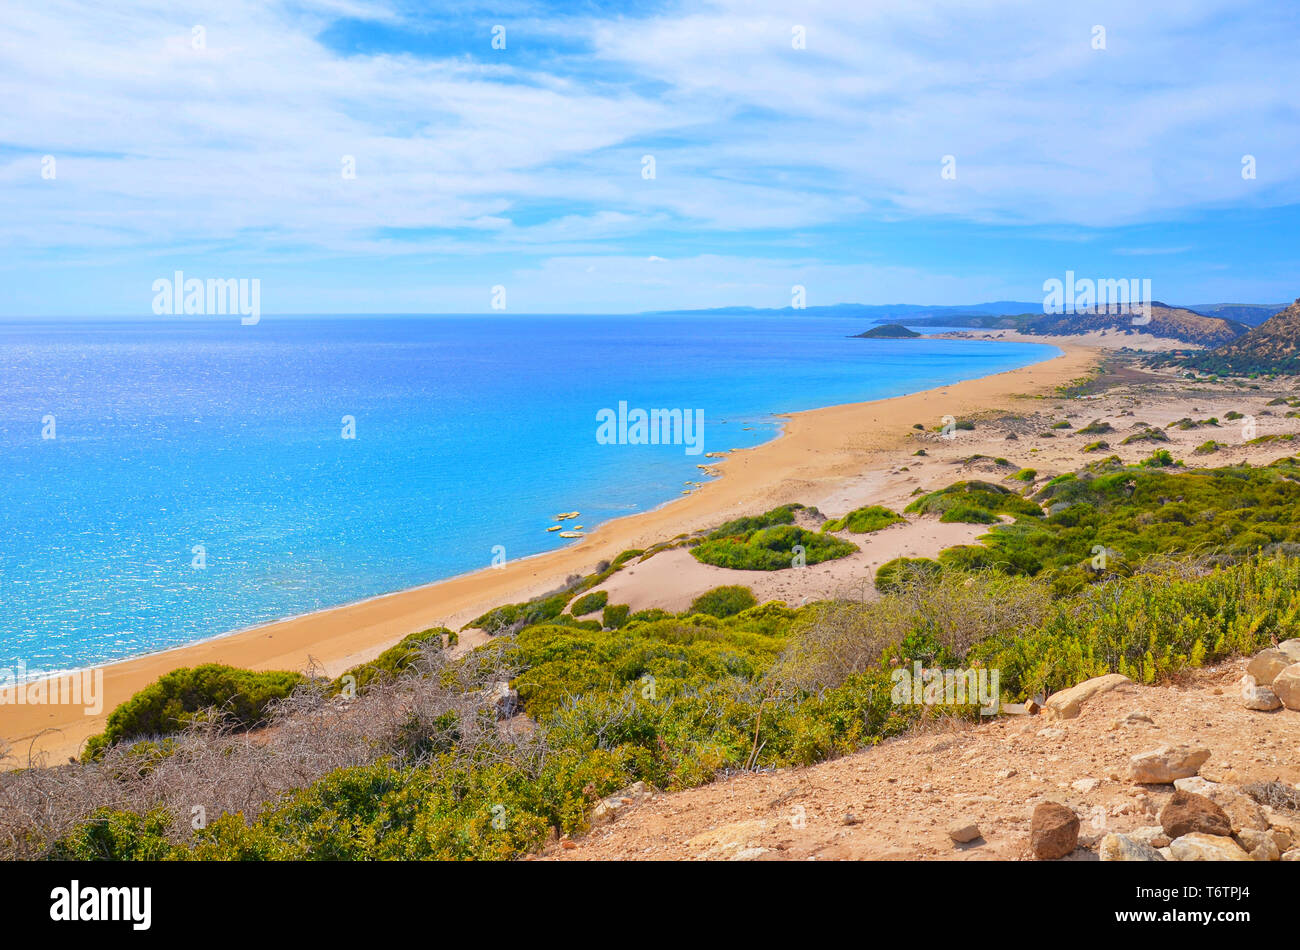 Amazing view of the Golden Beach in Karpas Peninsula, Turkish Northern Cyprus taken on a sunny summer day. One of the most beautiful Cypriot beaches is an amazing off the beaten track spot. Stock Photo